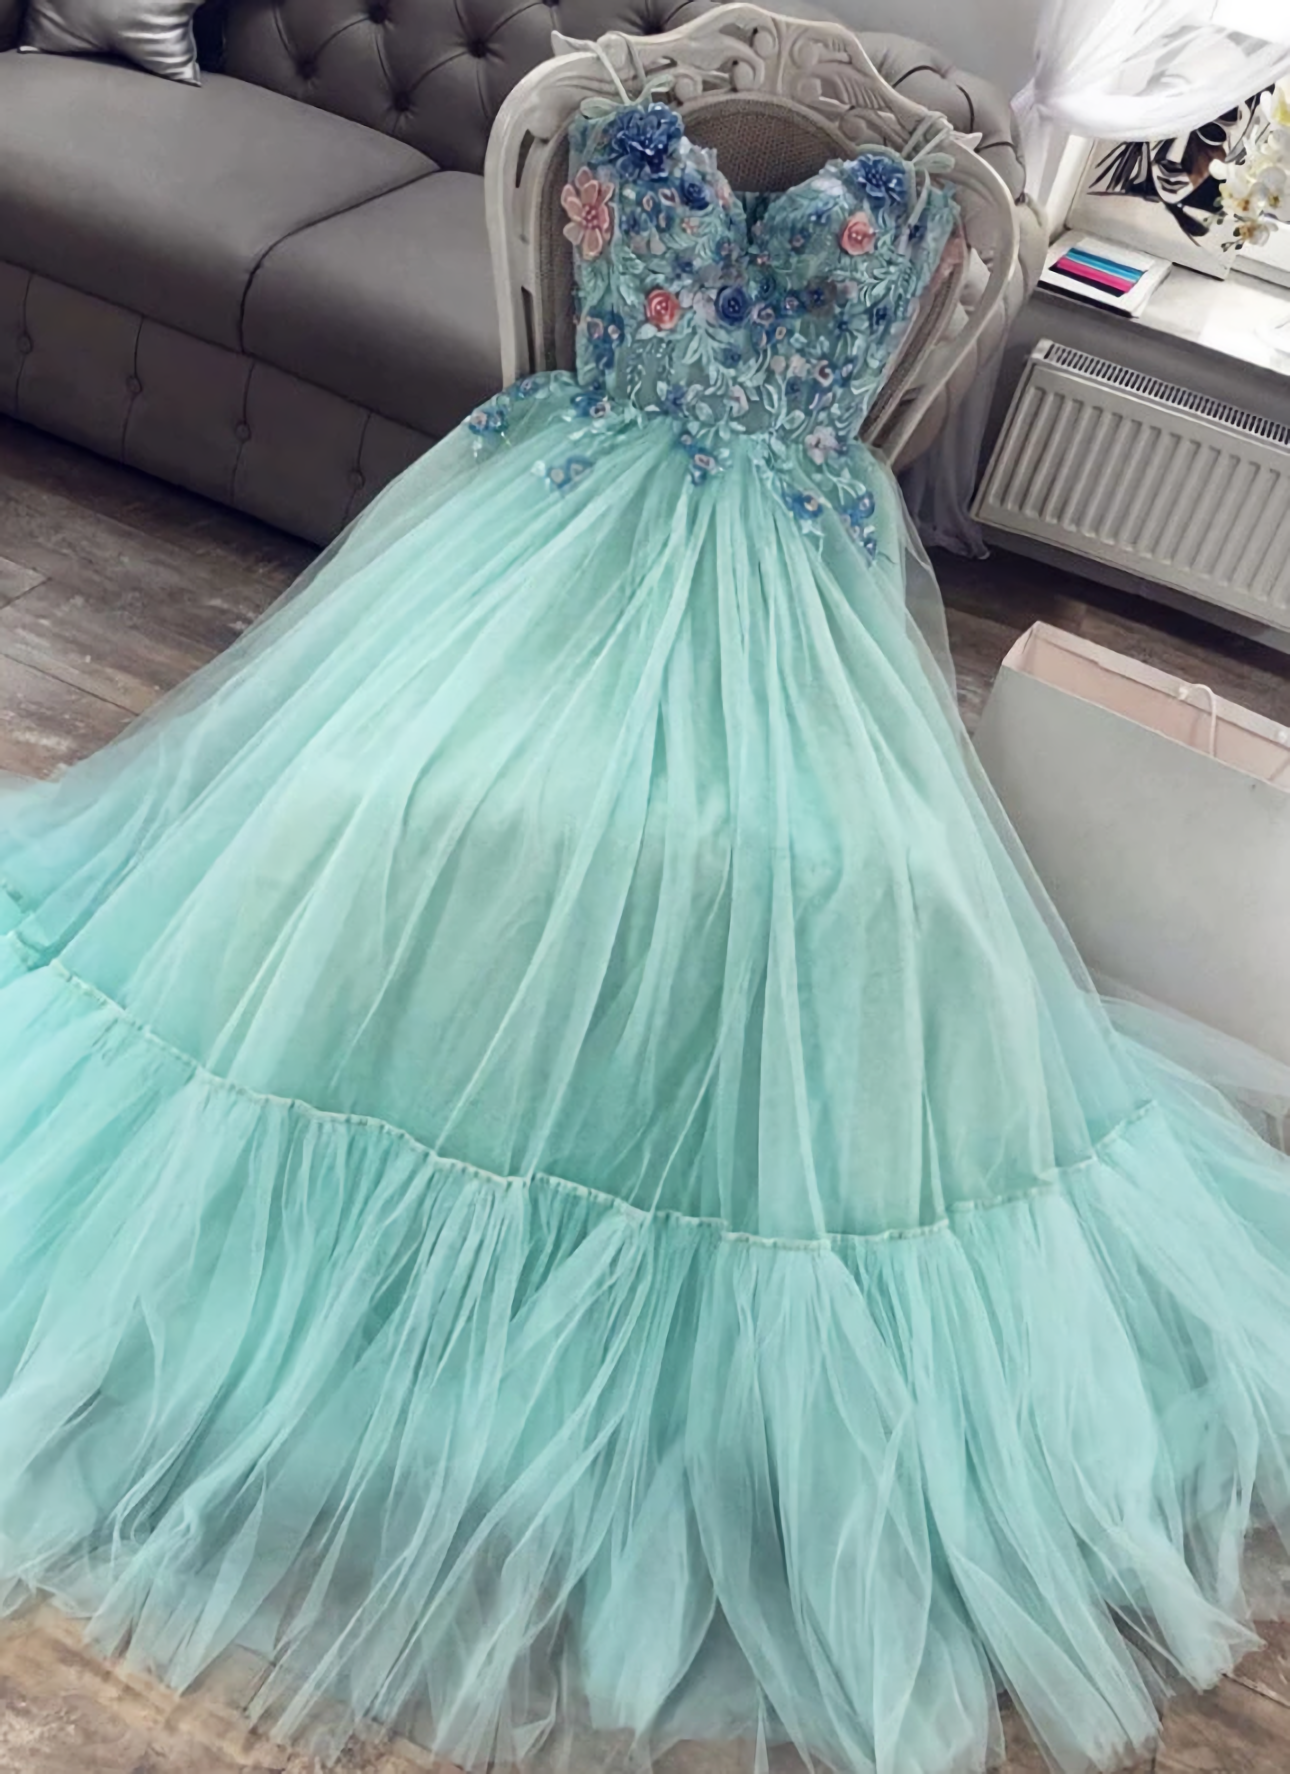 Green Sweetheart Tulle Lace Long Corset Prom Dress, Green Evening Dress outfit, Homecoming Dresses Idea